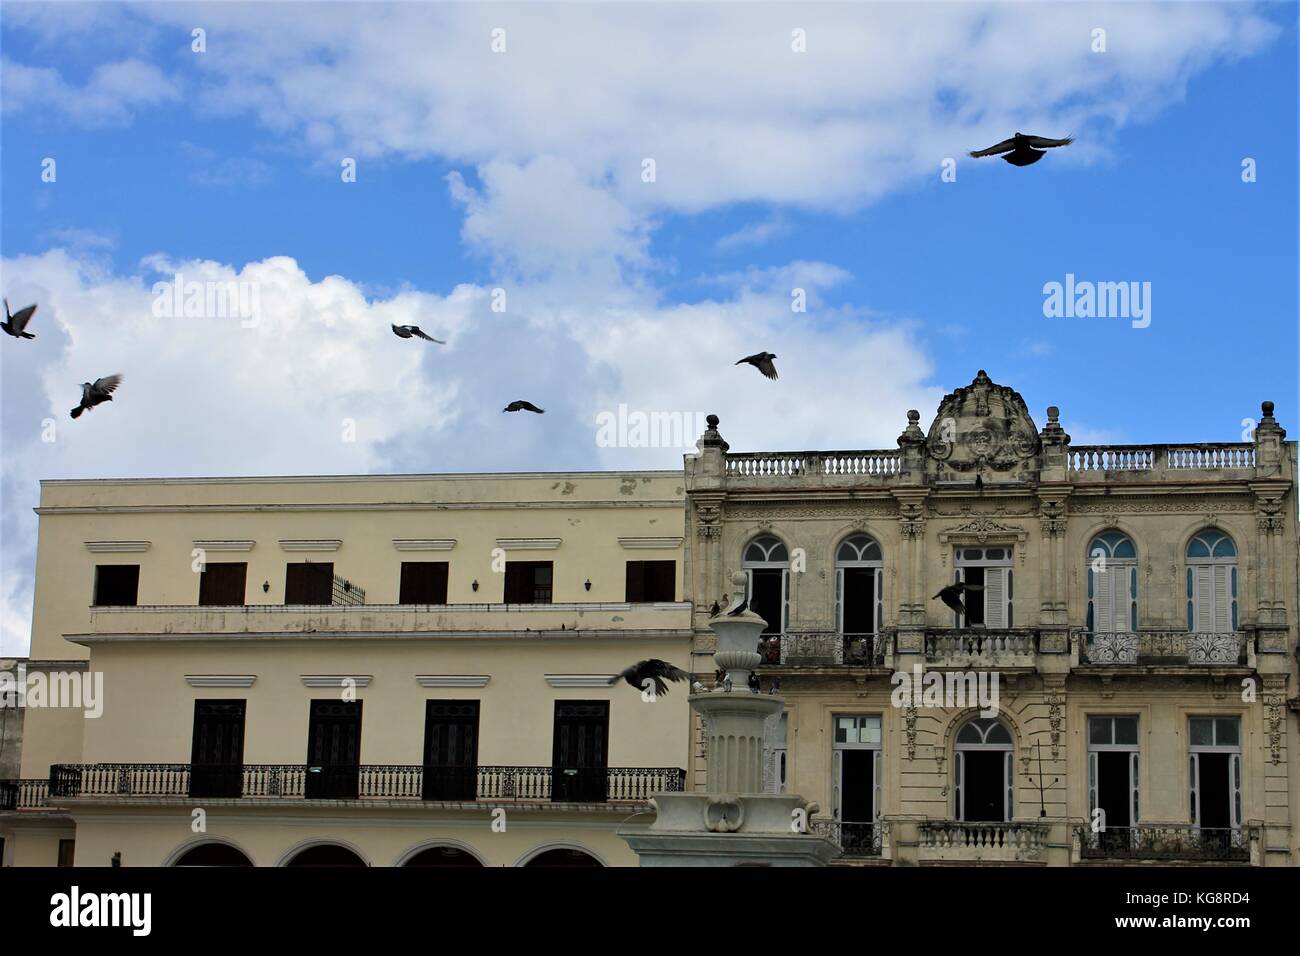 Birds flying past old buildings, Old Square, Havana, Cuba. Stock Photo